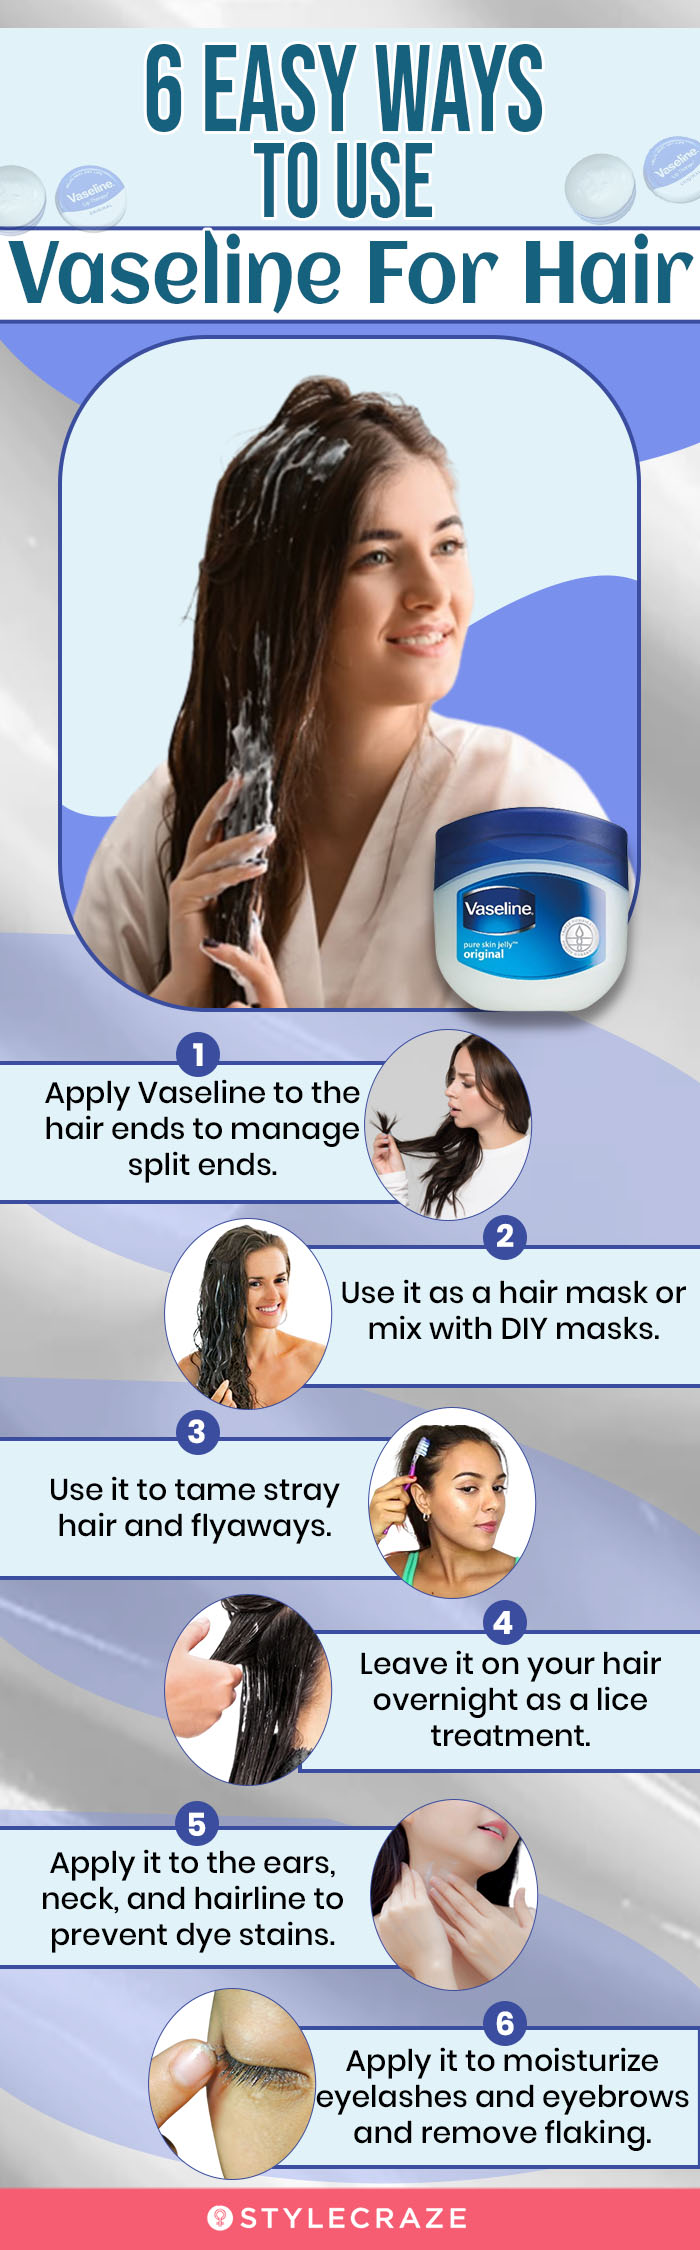 6 easy ways to use vaseline for hair (infographic)